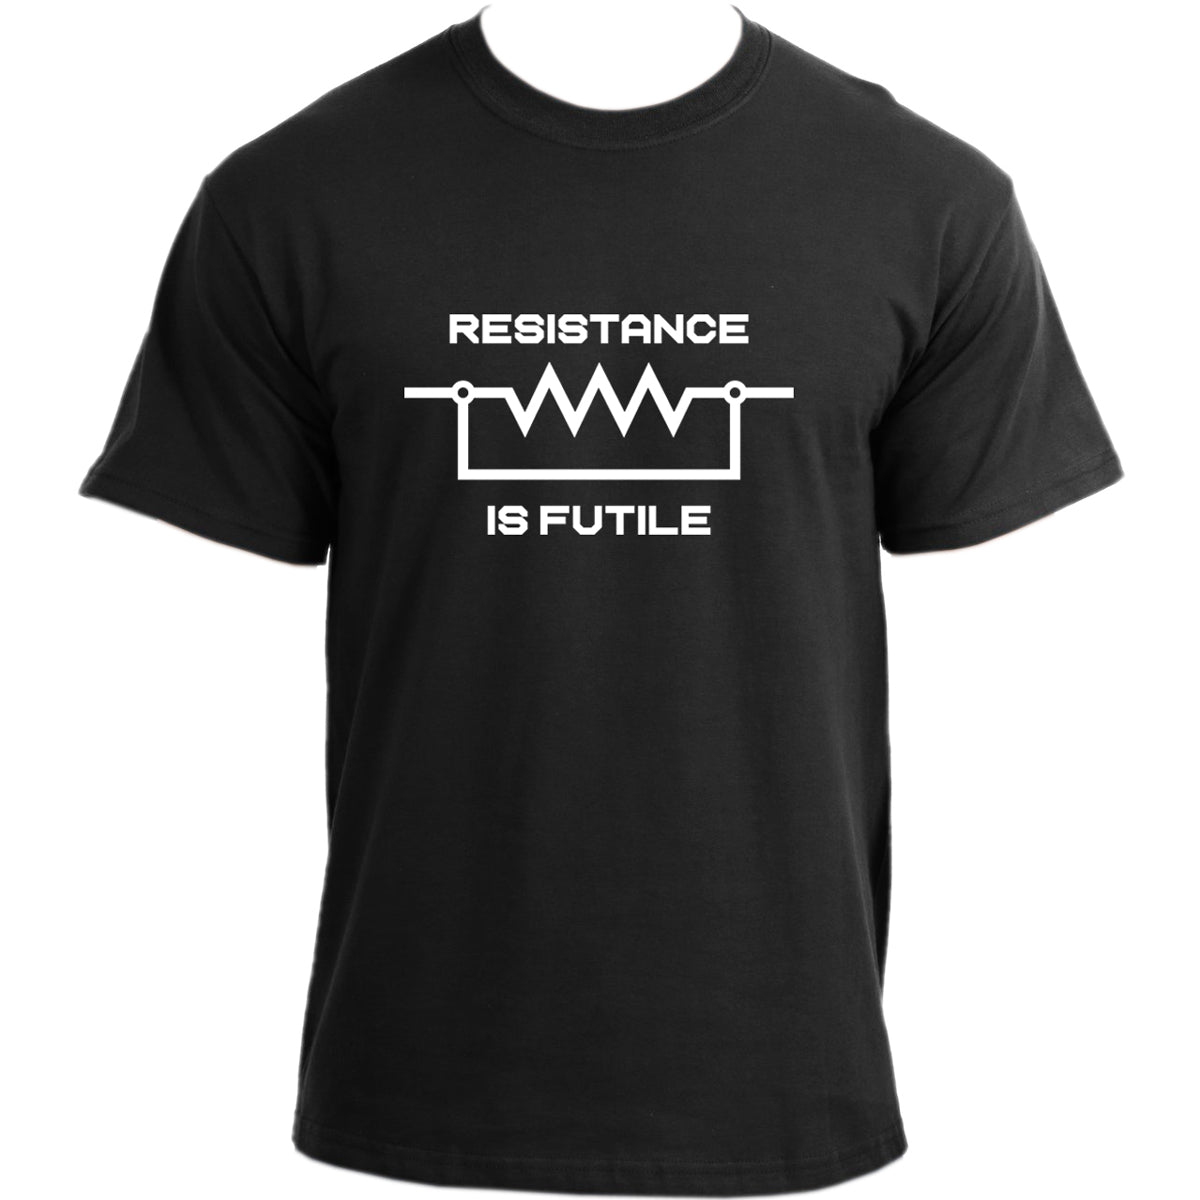 Resistance Is Not Futile T-SHIRT Nerd Electrician Science Funny TV Show inspired TShirt